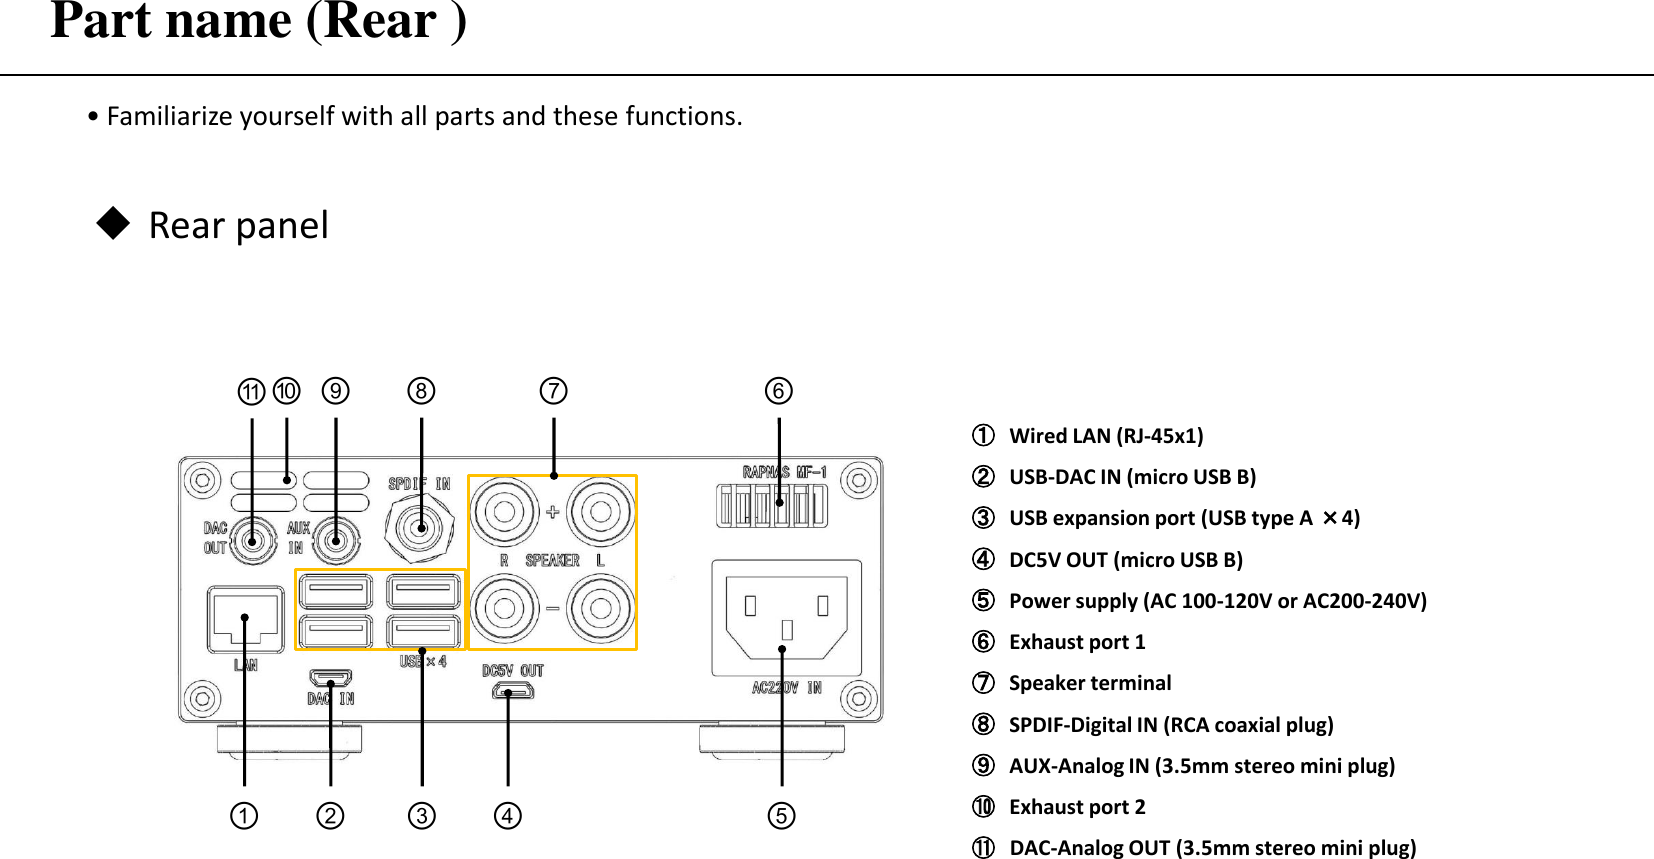 Part name (Rear ) ①Wired LAN (RJ-45x1) ②USB-DAC IN (micro USB B) ③USB expansion port (USB type A ×4) ④DC5V OUT (micro USB B) ⑤Power supply (AC 100-120V or AC200-240V) ⑥Exhaust port 1 ⑦Speaker terminal ⑧SPDIF-Digital IN (RCA coaxial plug) ⑨AUX-Analog IN (3.5mm stereo mini plug) ⑩Exhaust port 2 ⑪ DAC-Analog OUT (3.5mm stereo mini plug) Rear panel ② ④ ⑪ ① ⑧ ⑥ ③ ⑨ ⑤ ⑦ ⑩ • Familiarize yourself with all parts and these functions. 